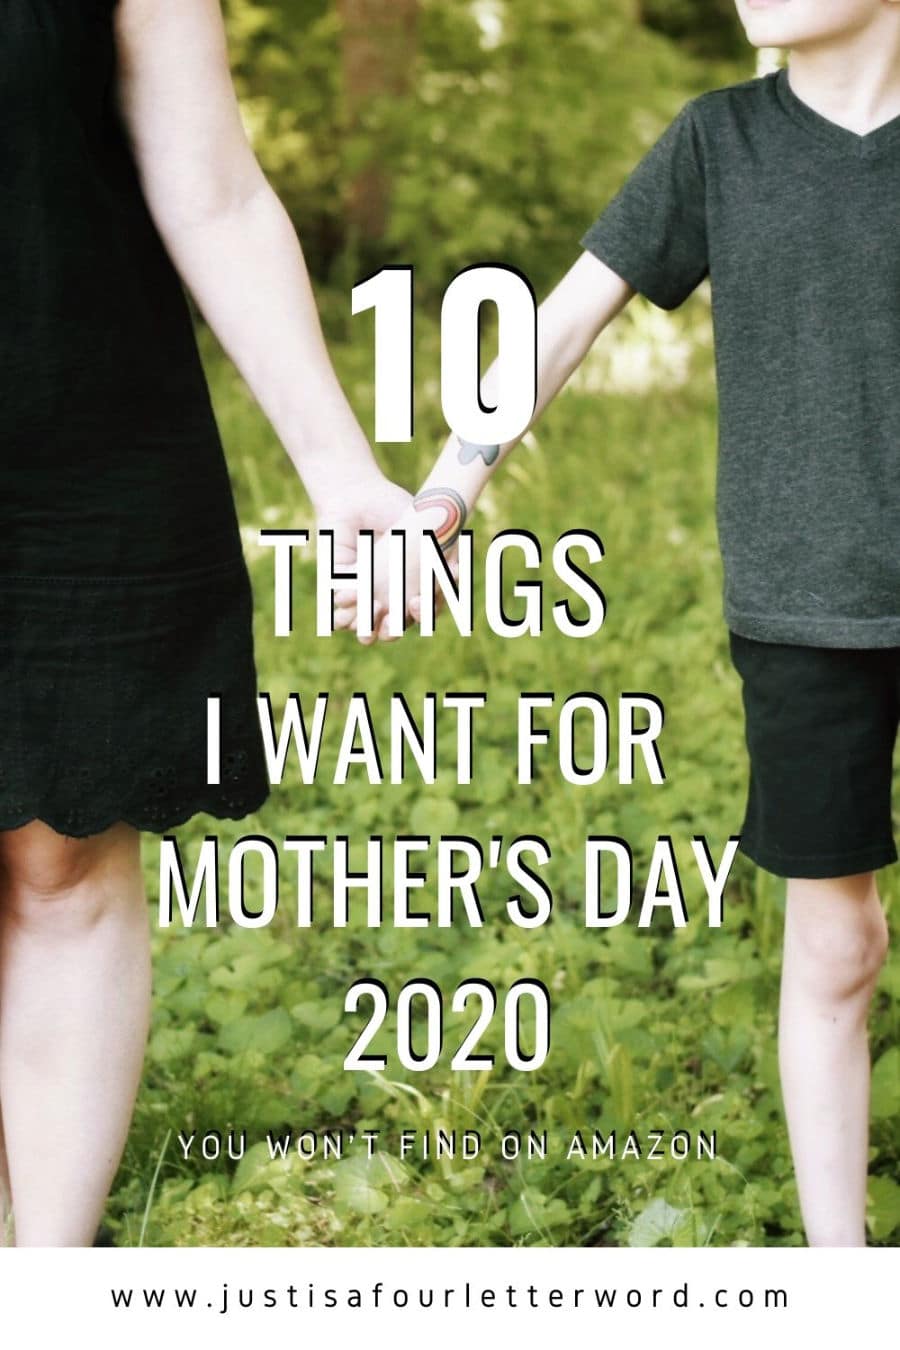 mother's day 2020 wish list covid